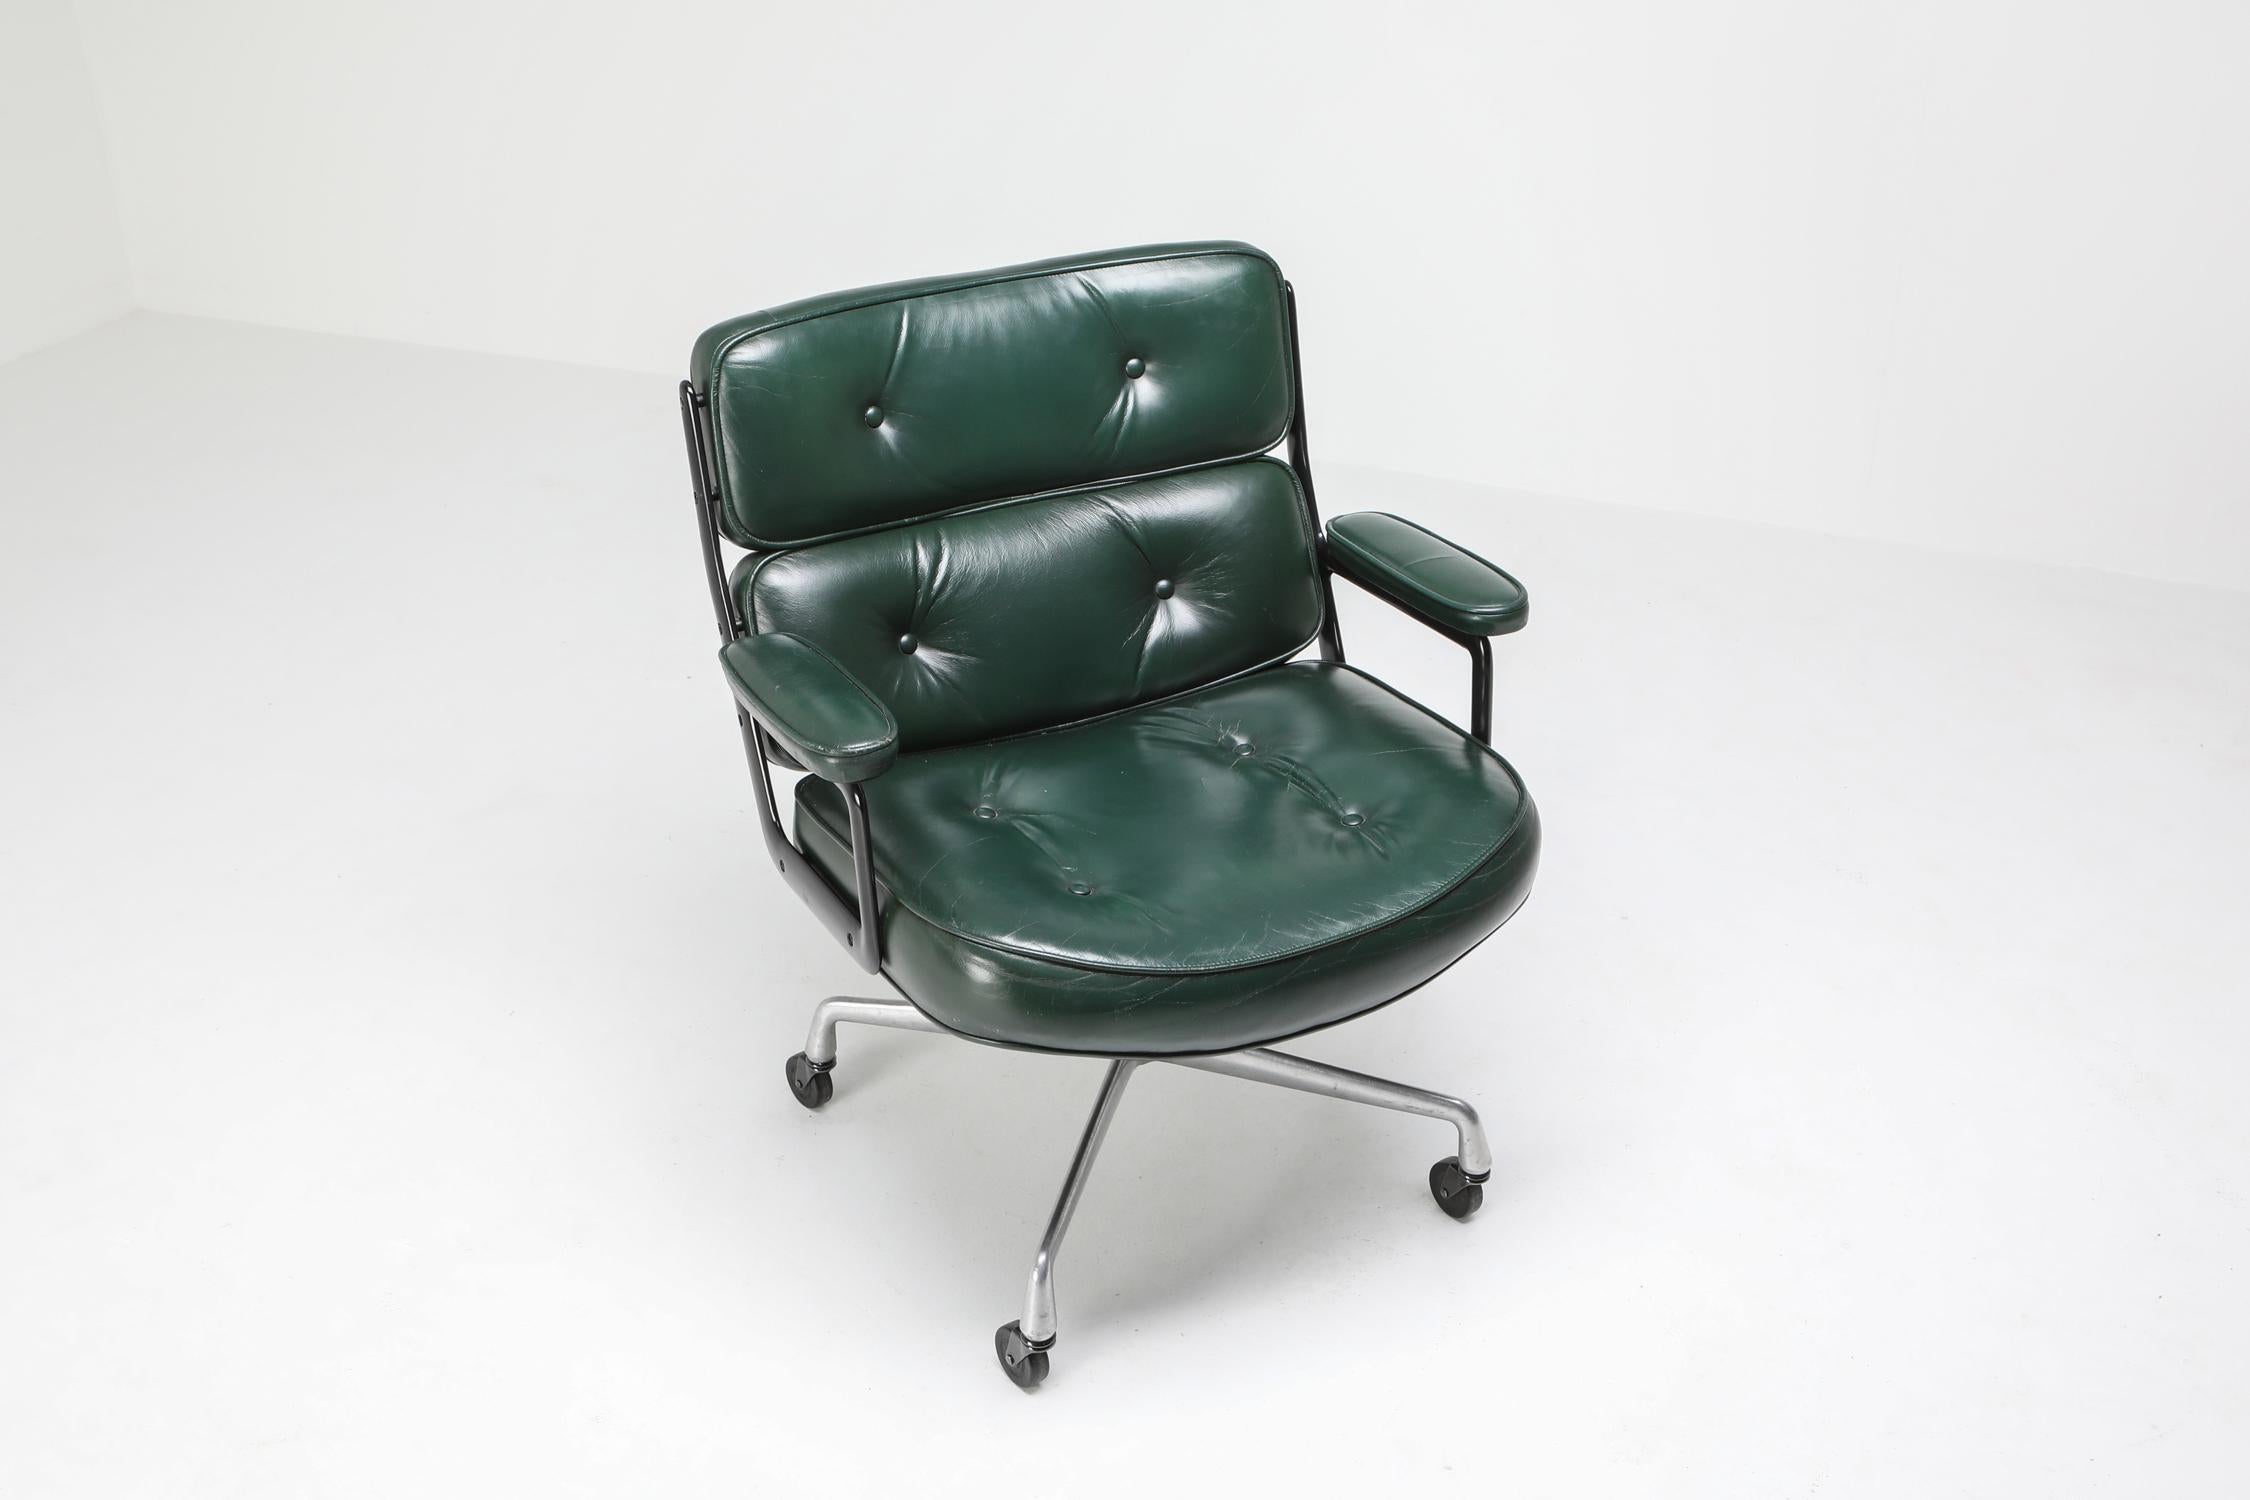 Mid-Century Modern desk chair by Charles and Ray Eames in green leather

a true mad men style gem.